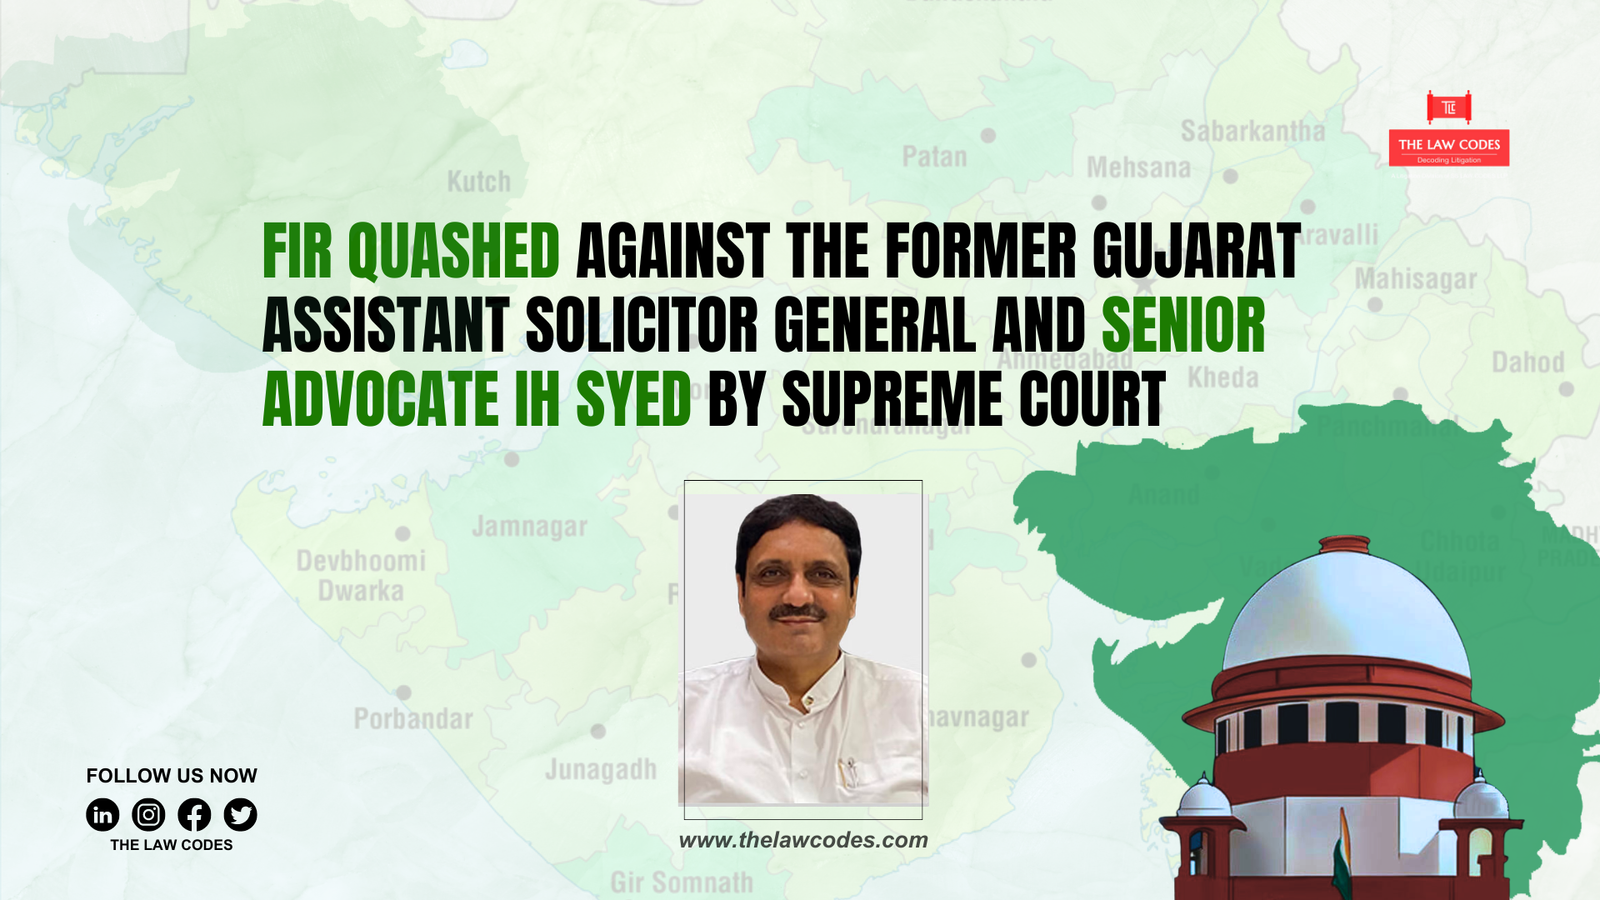 FIR quashed against the former Gujarat assistant solicitor general and Senior Advocate IH Syed by Supreme Court